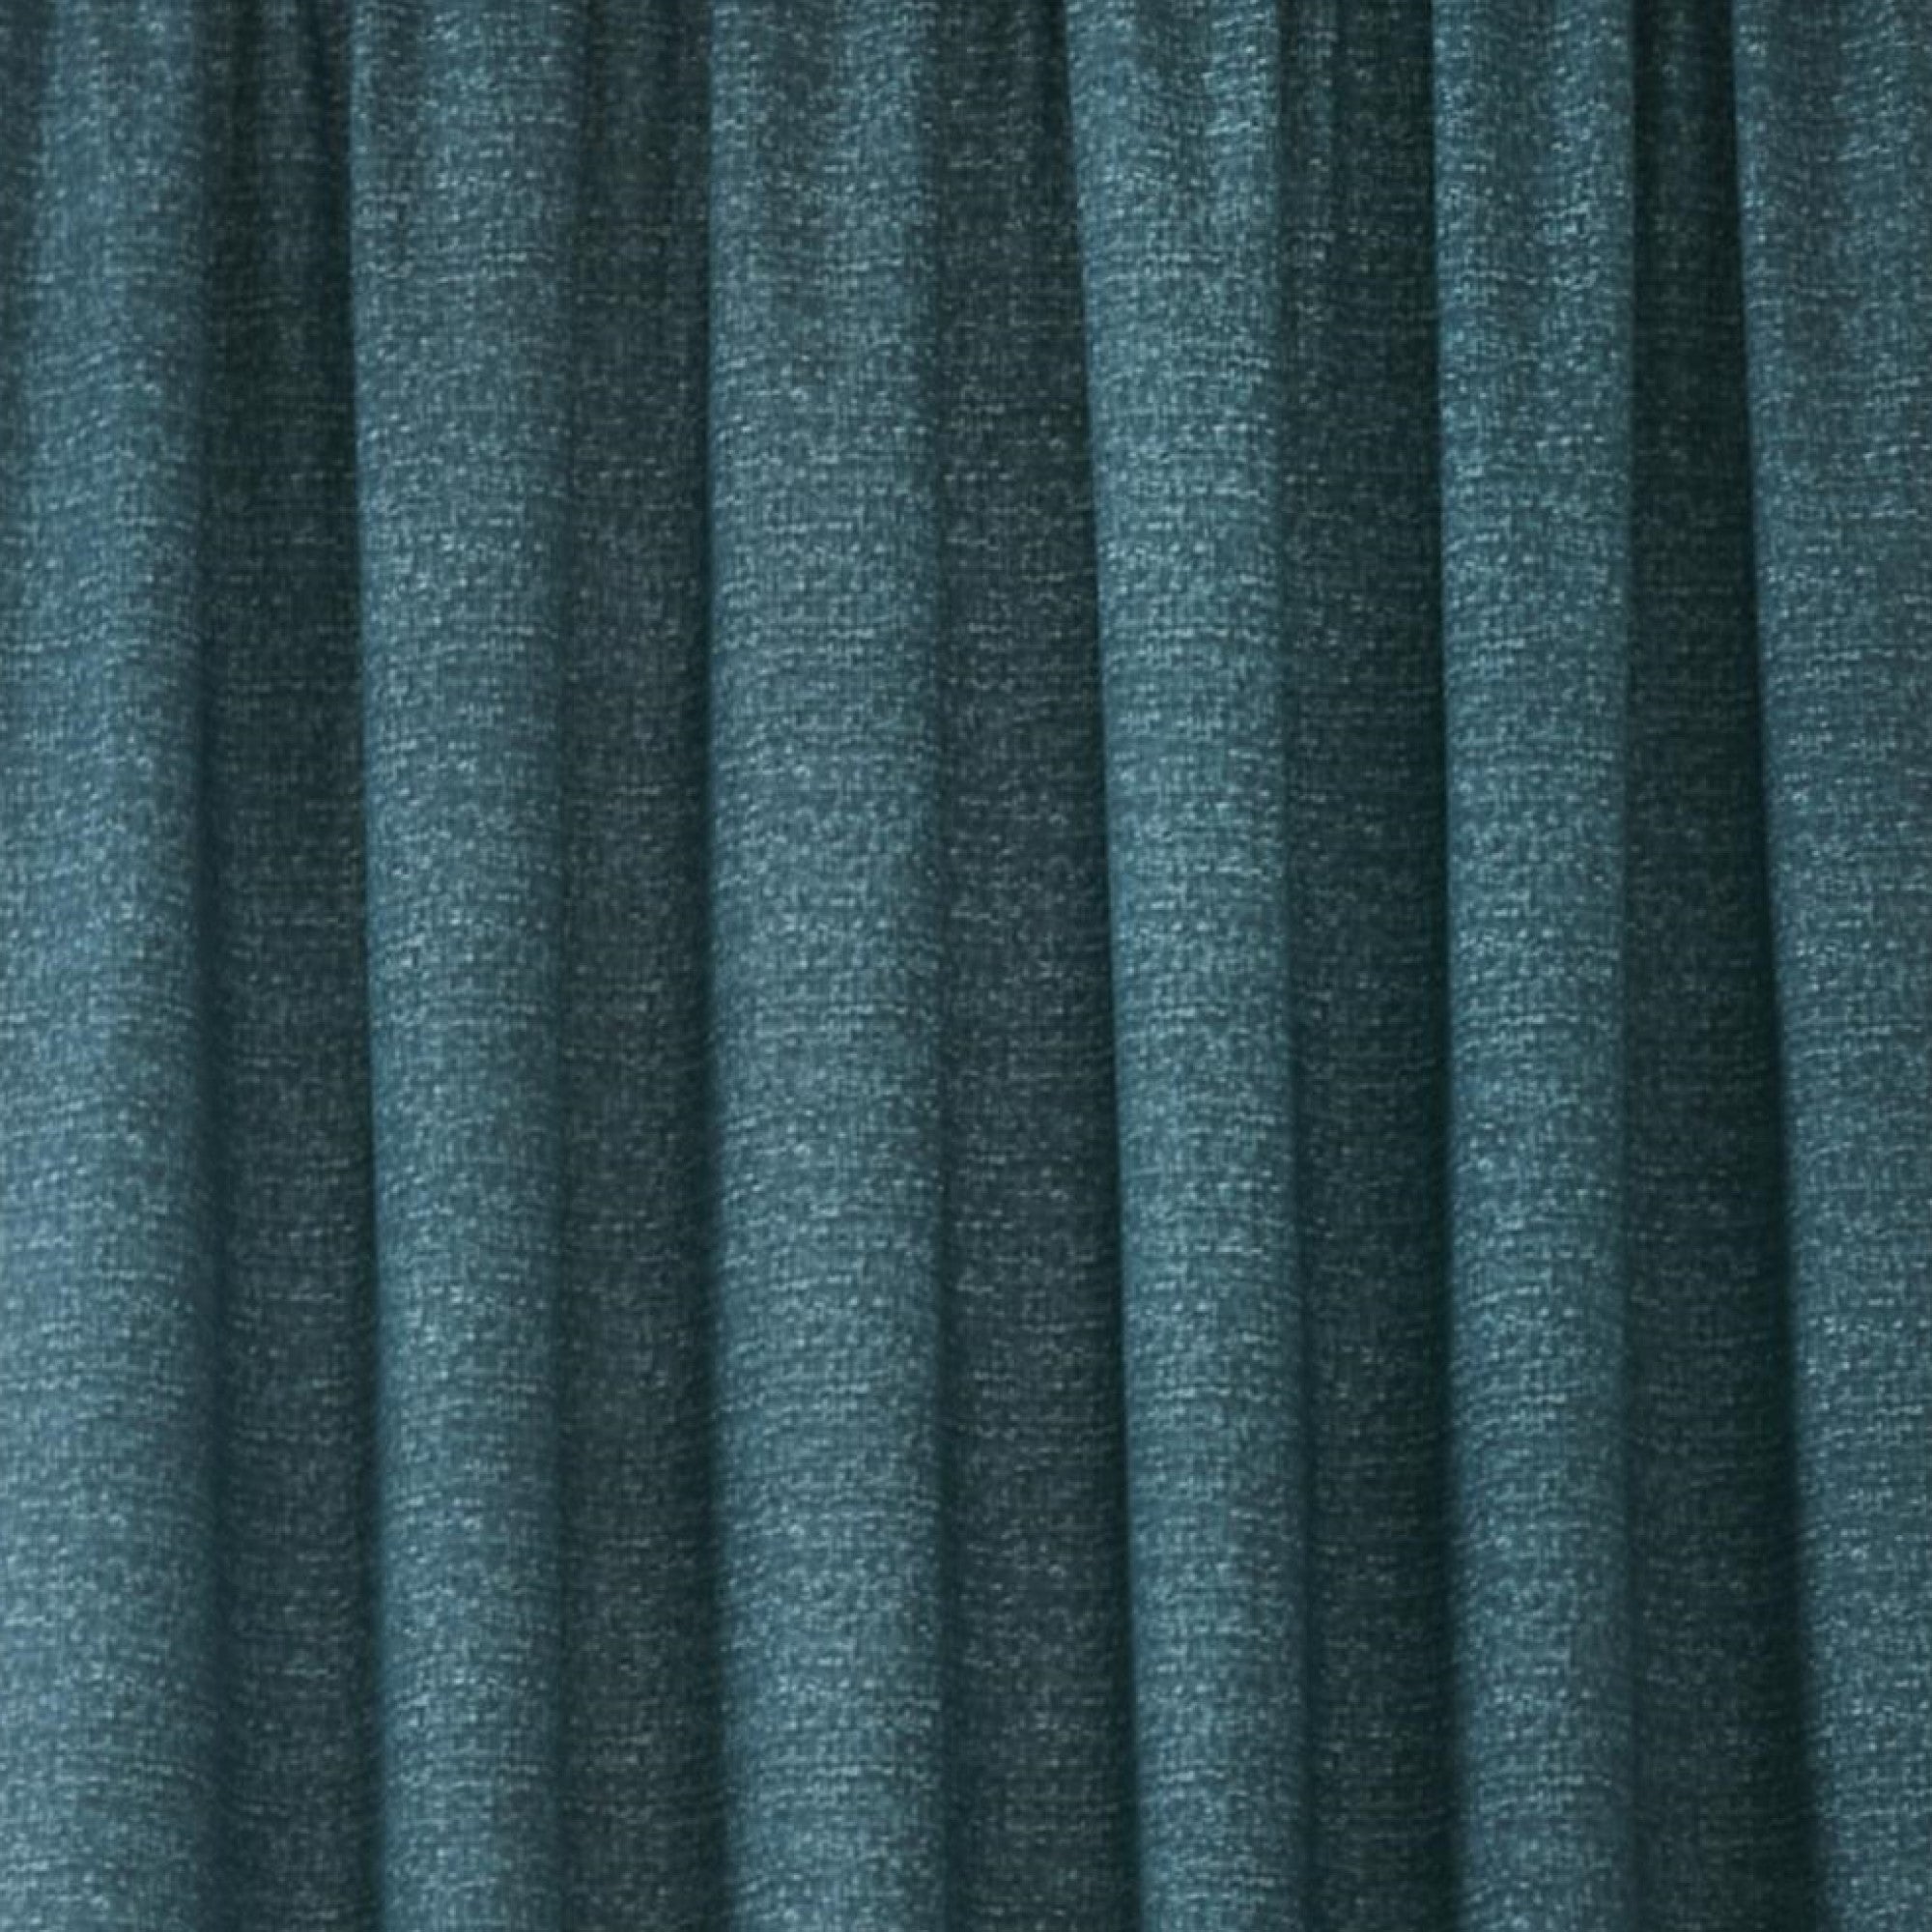 Pair of Pencil Pleat Curtains With Tie-Backs Pembrey by D&D in Teal